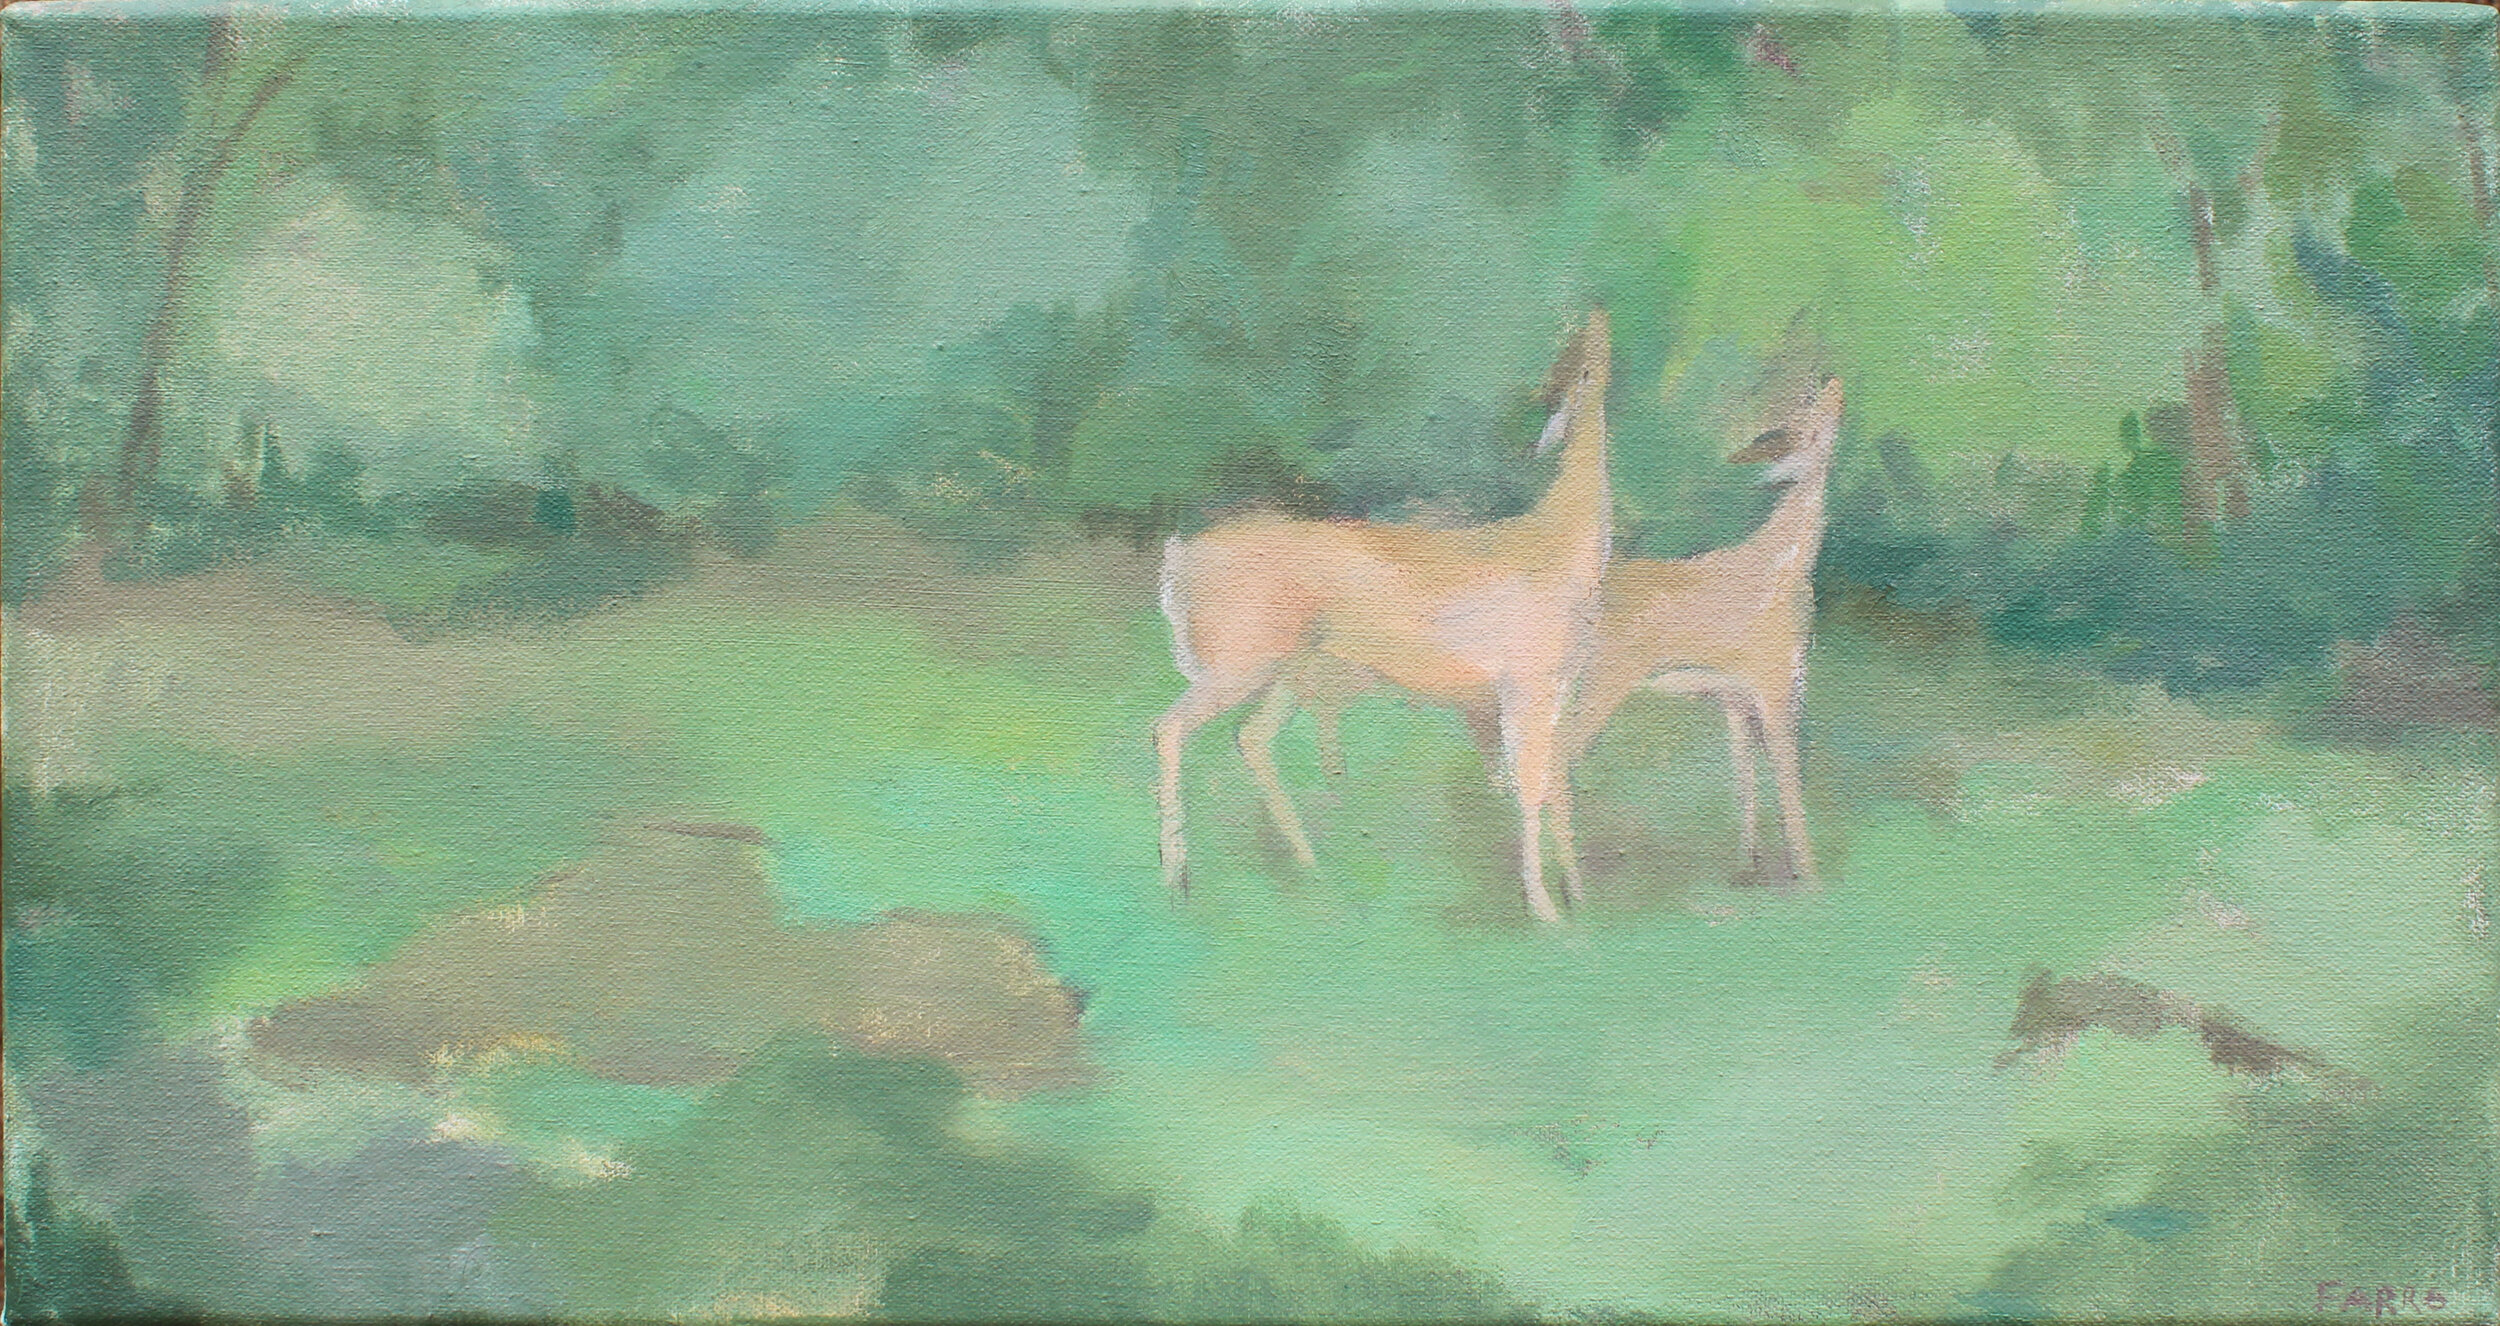    Peace in the Valley   oil on canvas 9 x 17” 2020   purchase  